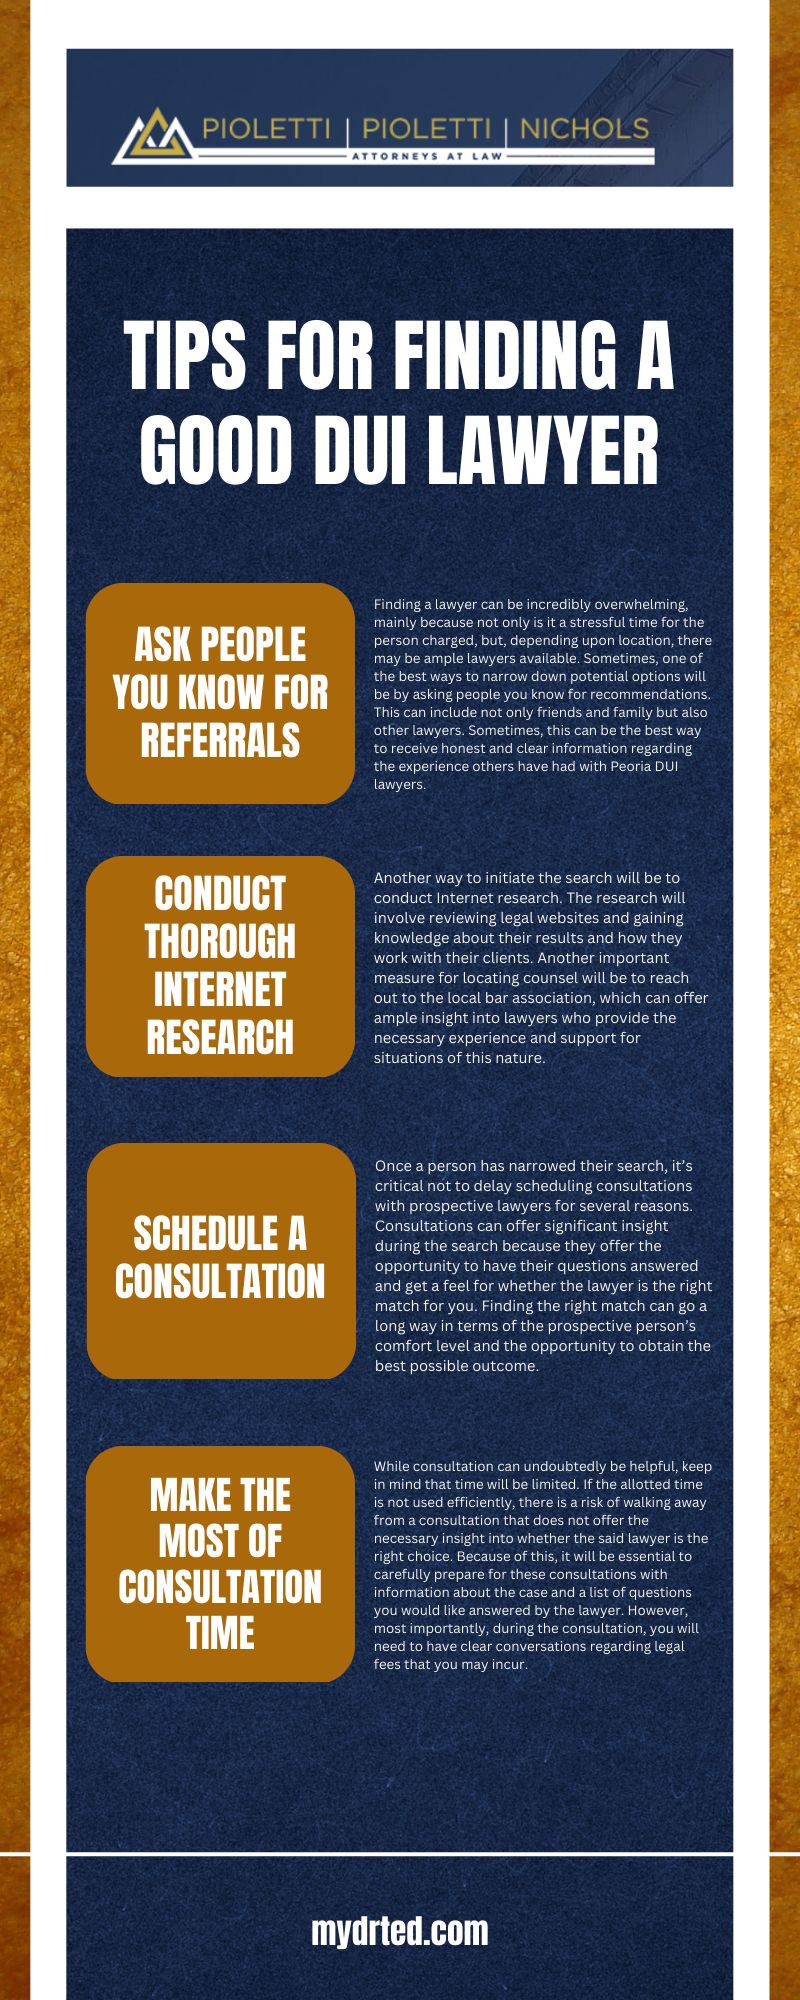 TIPS FOR FINDING A GOOD DUI LAWYER INFOGRAPHIC